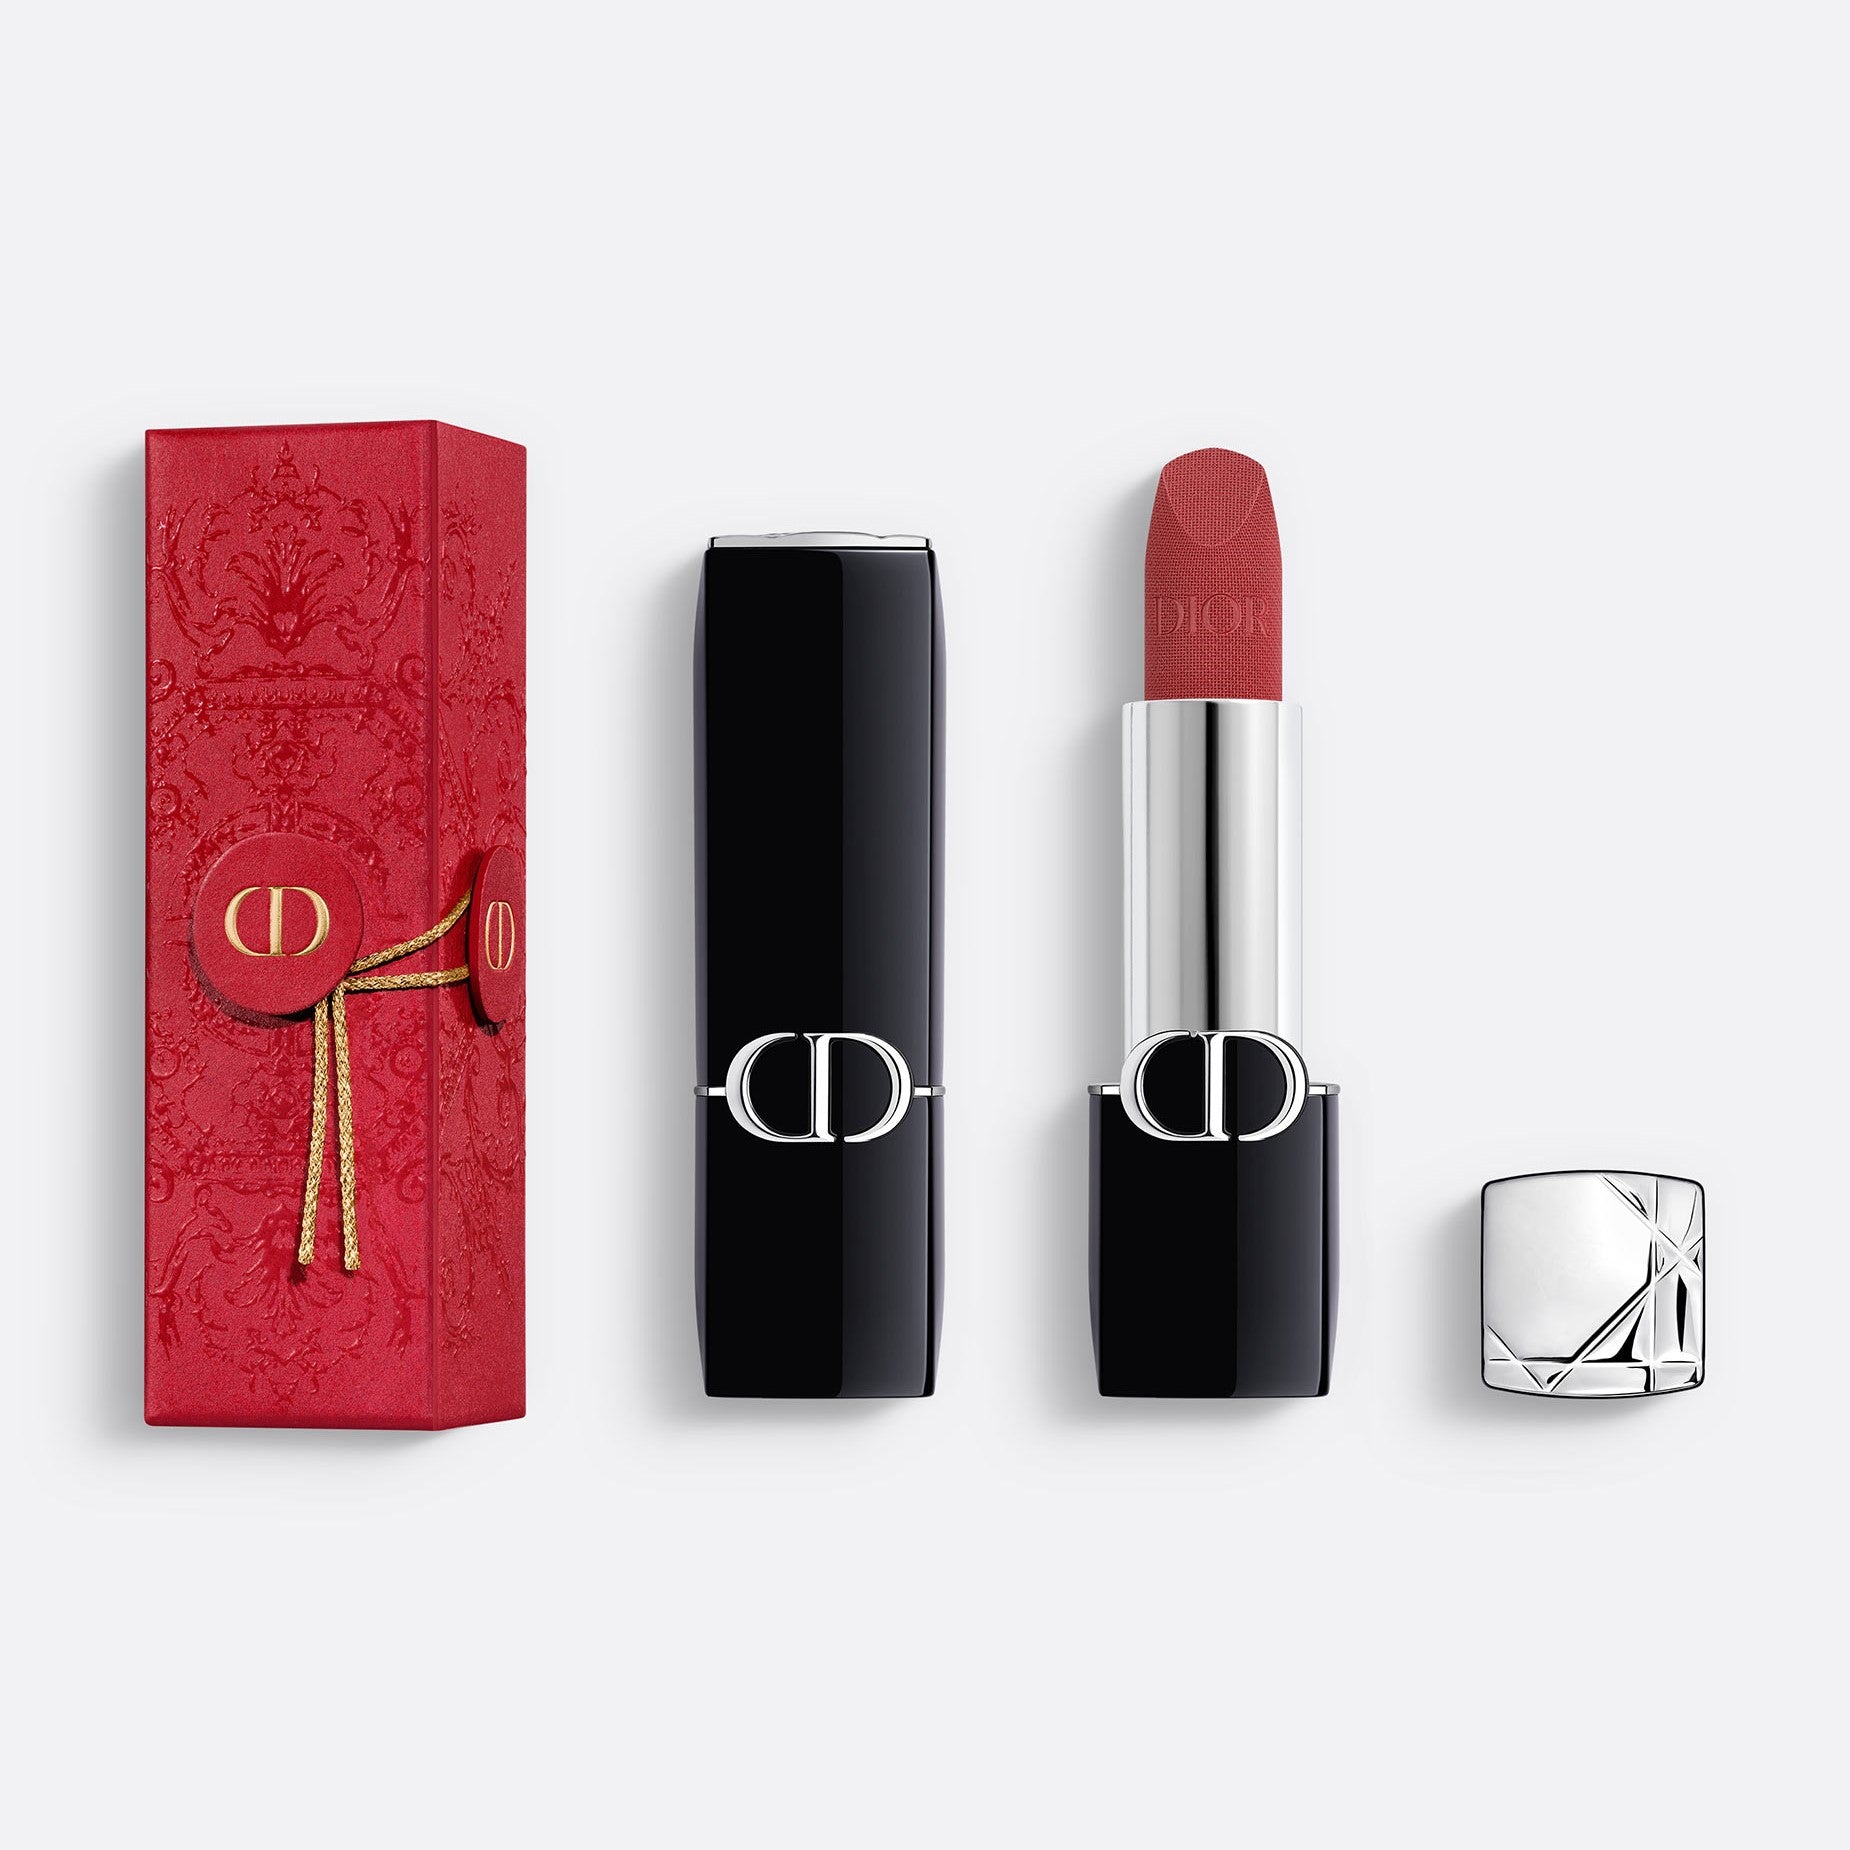 ROUGE DIOR - LIMITED EDITION ~ Lipstick - Couture Color - Hydrating Floral Lip Care - Long Wear